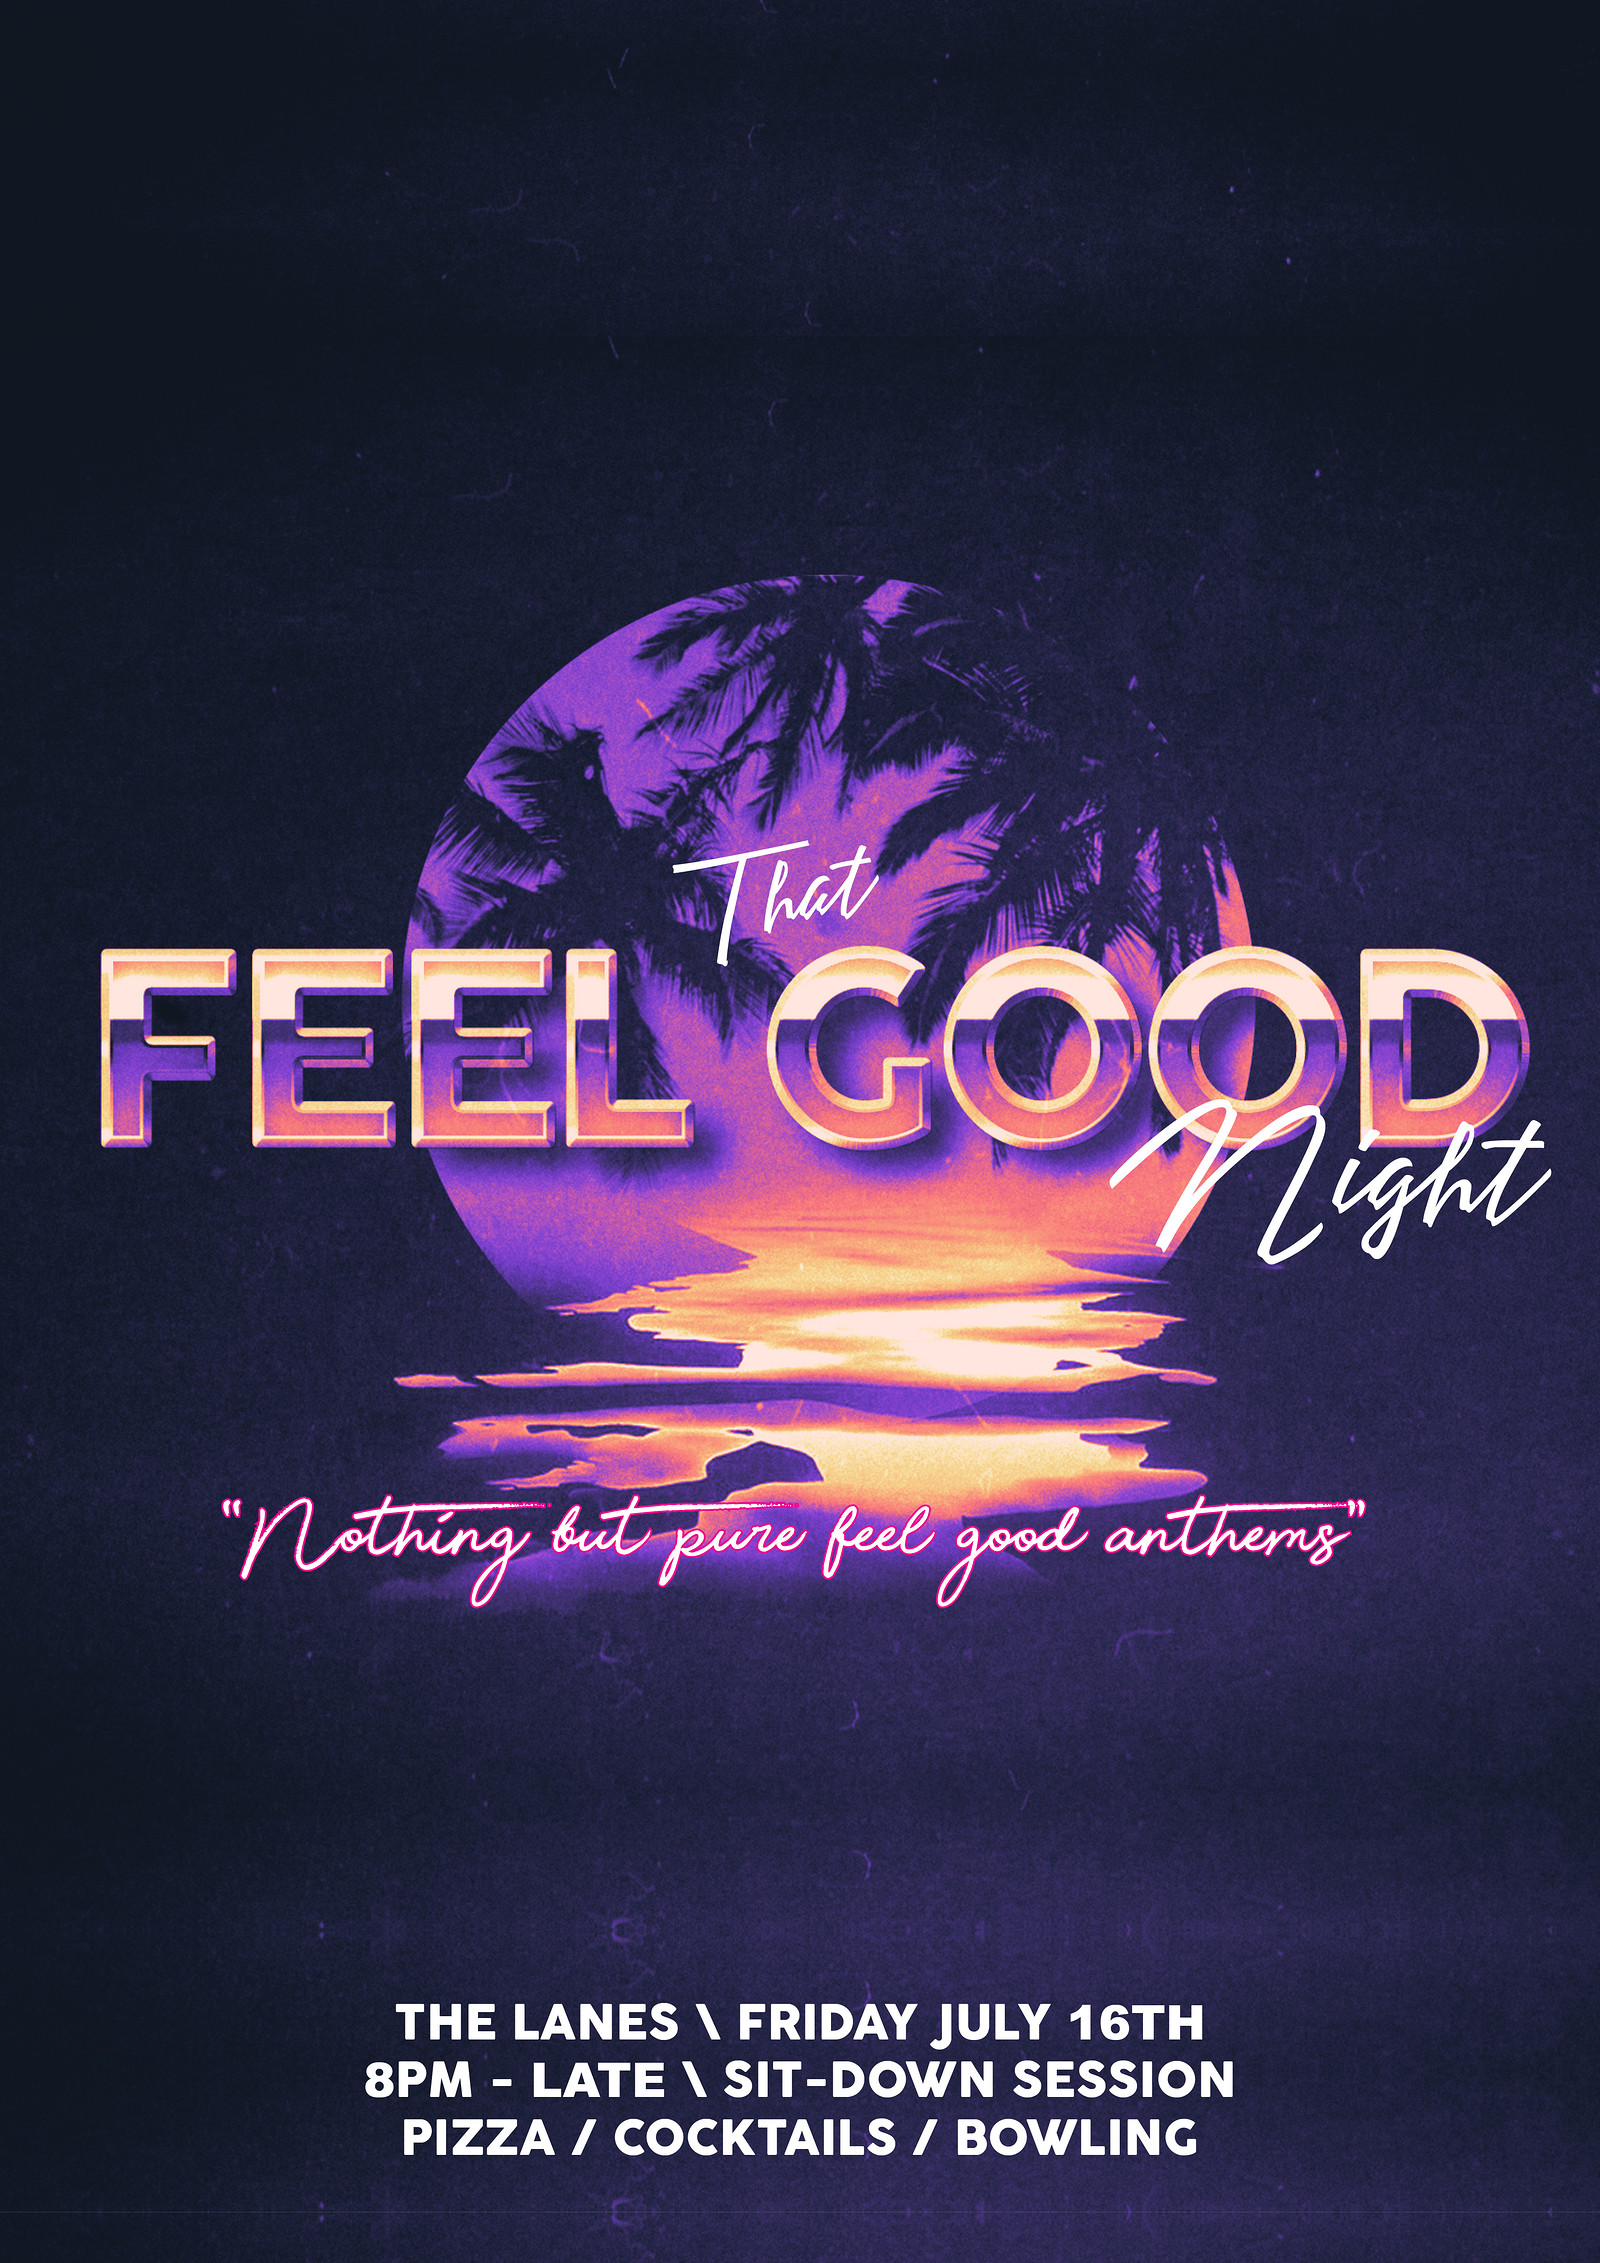 That Feel Good Night - Non-stop Feel Good Anthems at The Lanes